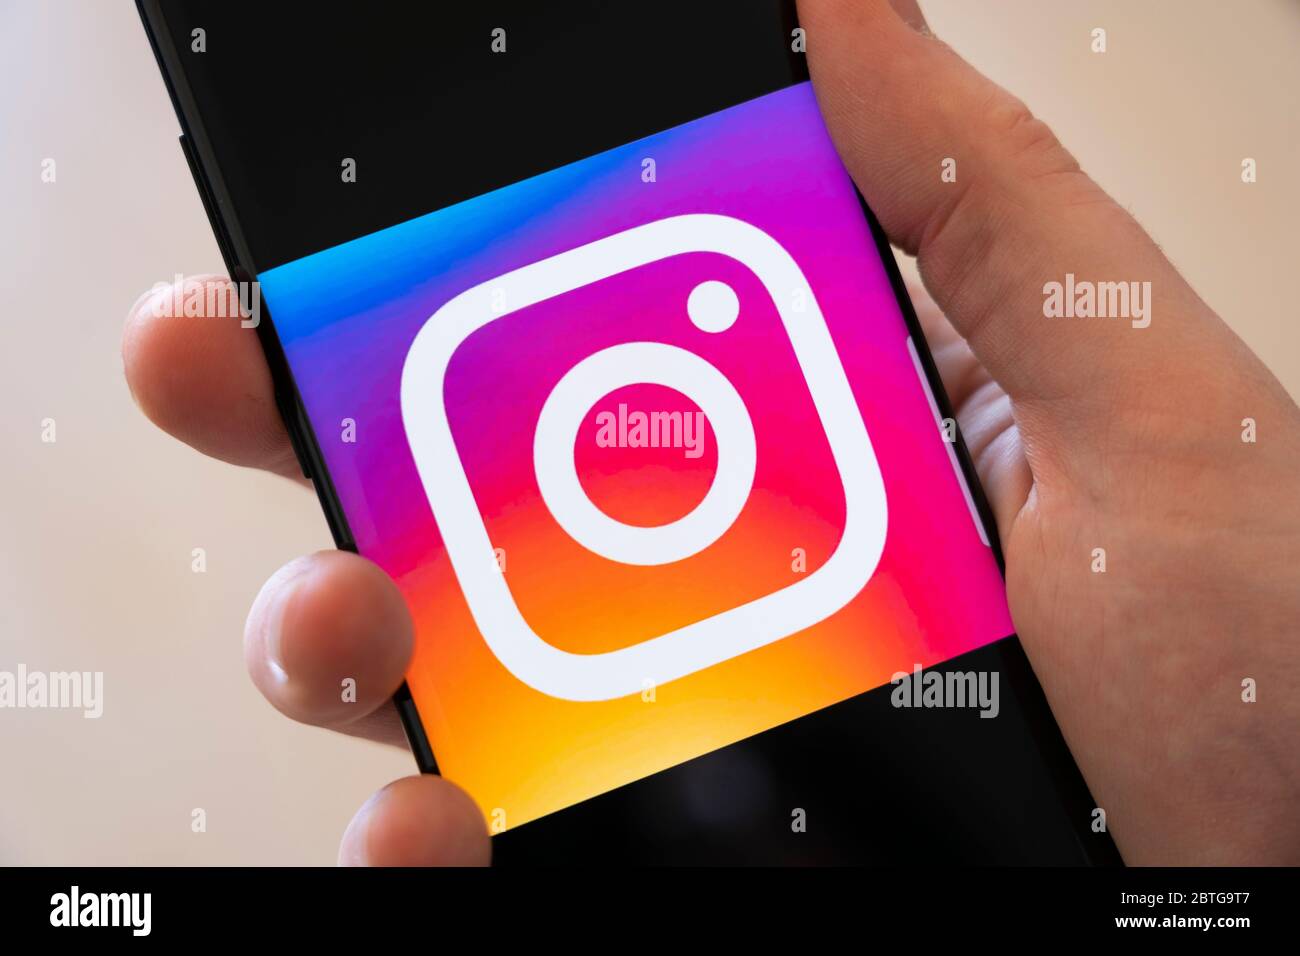 A man's hand holding a smartphone displaying a large logo for the photo sharing social media app Instagram Stock Photo